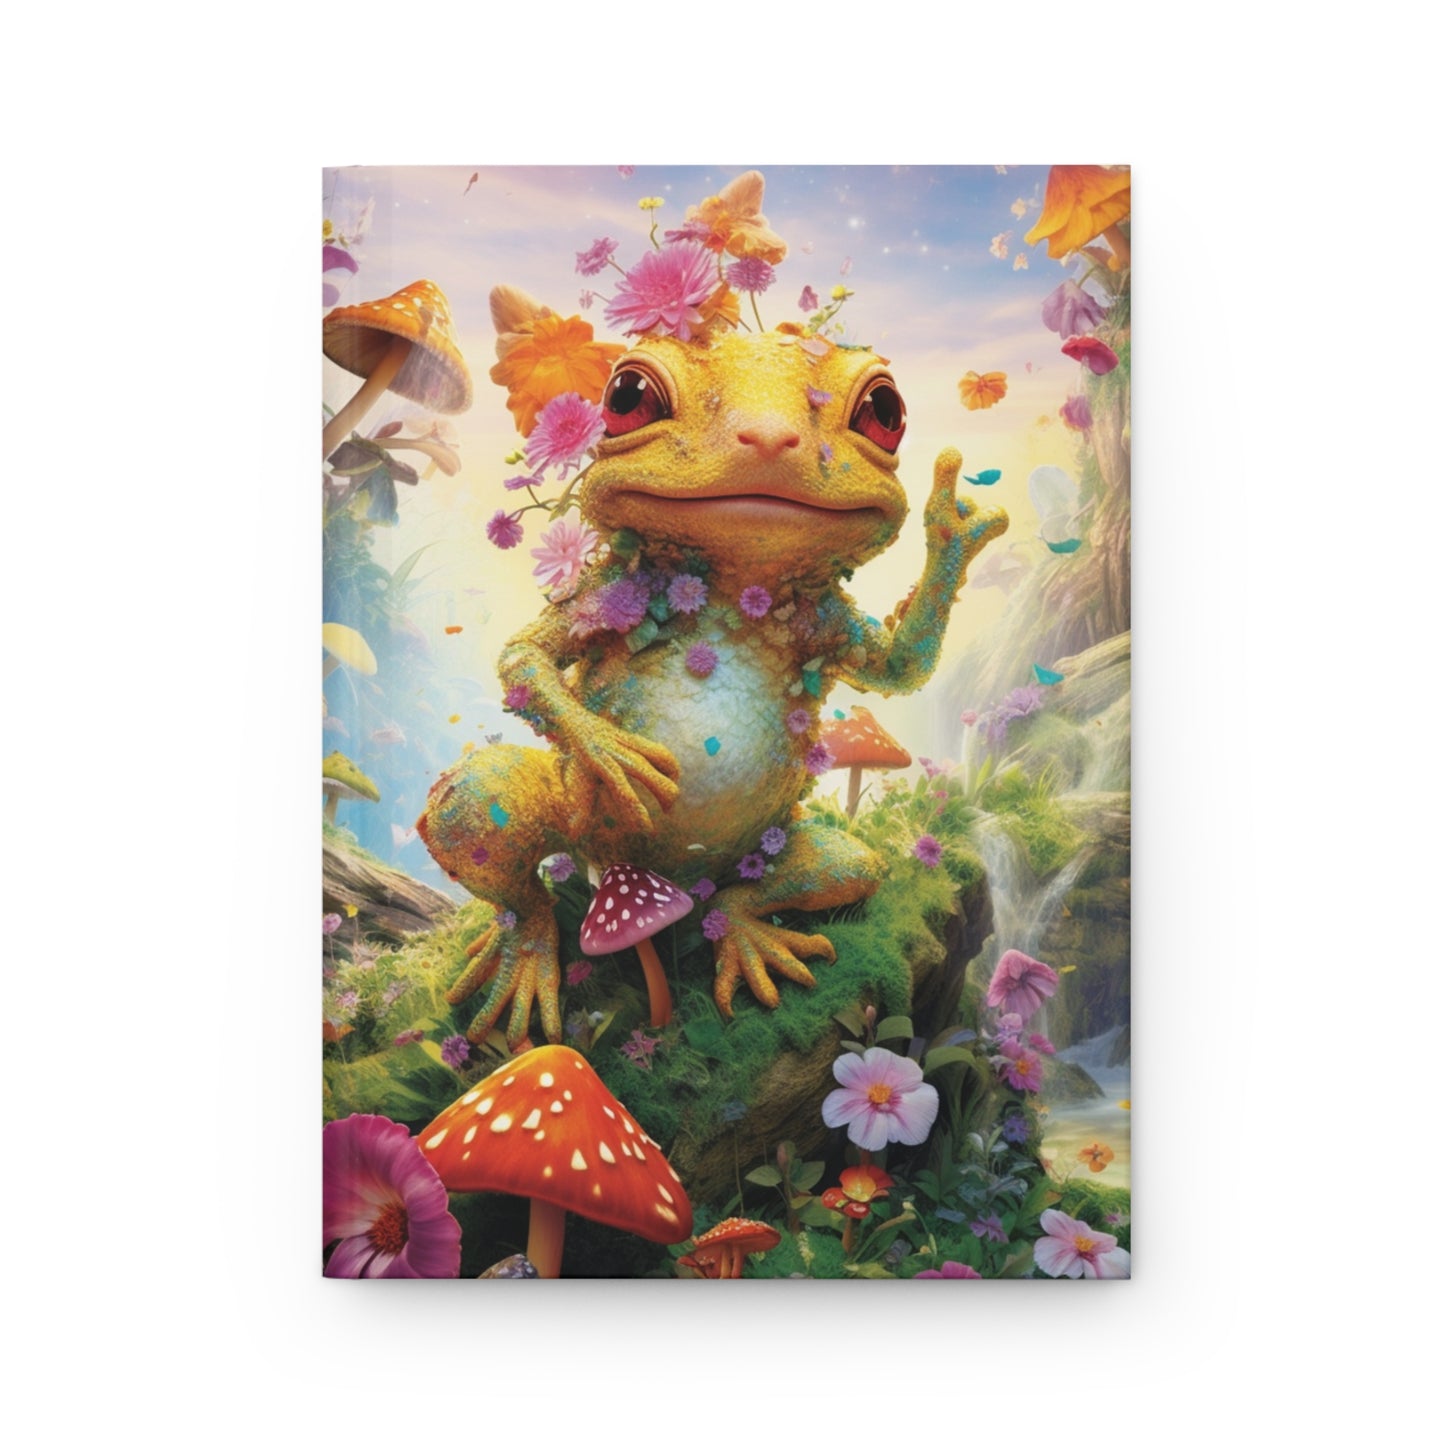 Frog & Floral Mushroom Hardcover Journal Notebook - Nature-Inspired Writing Diary, Self-Care Reflection, Mindfulness Sketchbook, 5.75"x7.5"